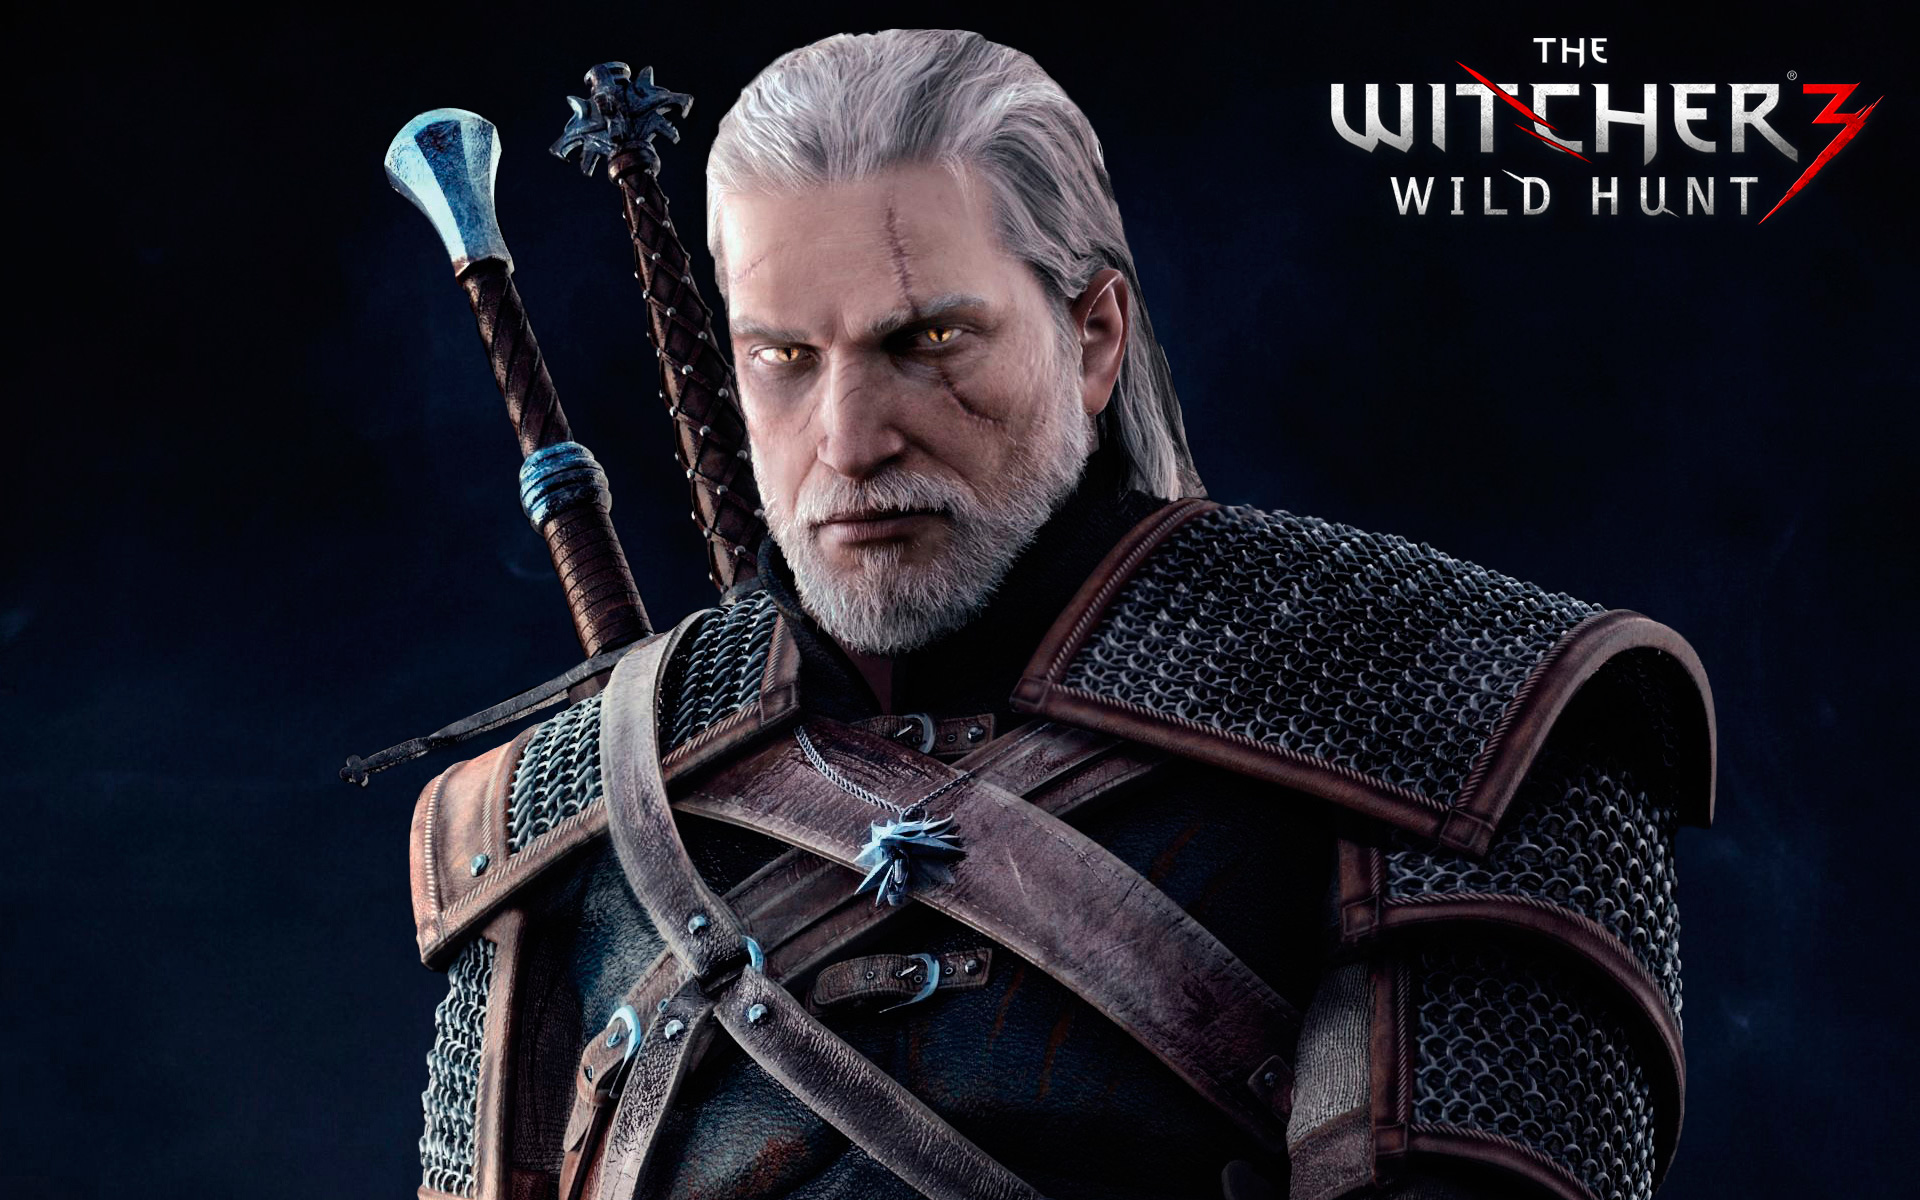 The Witcher 3 Game - Wallpaper, High Definition, High Quality, Widescreen
